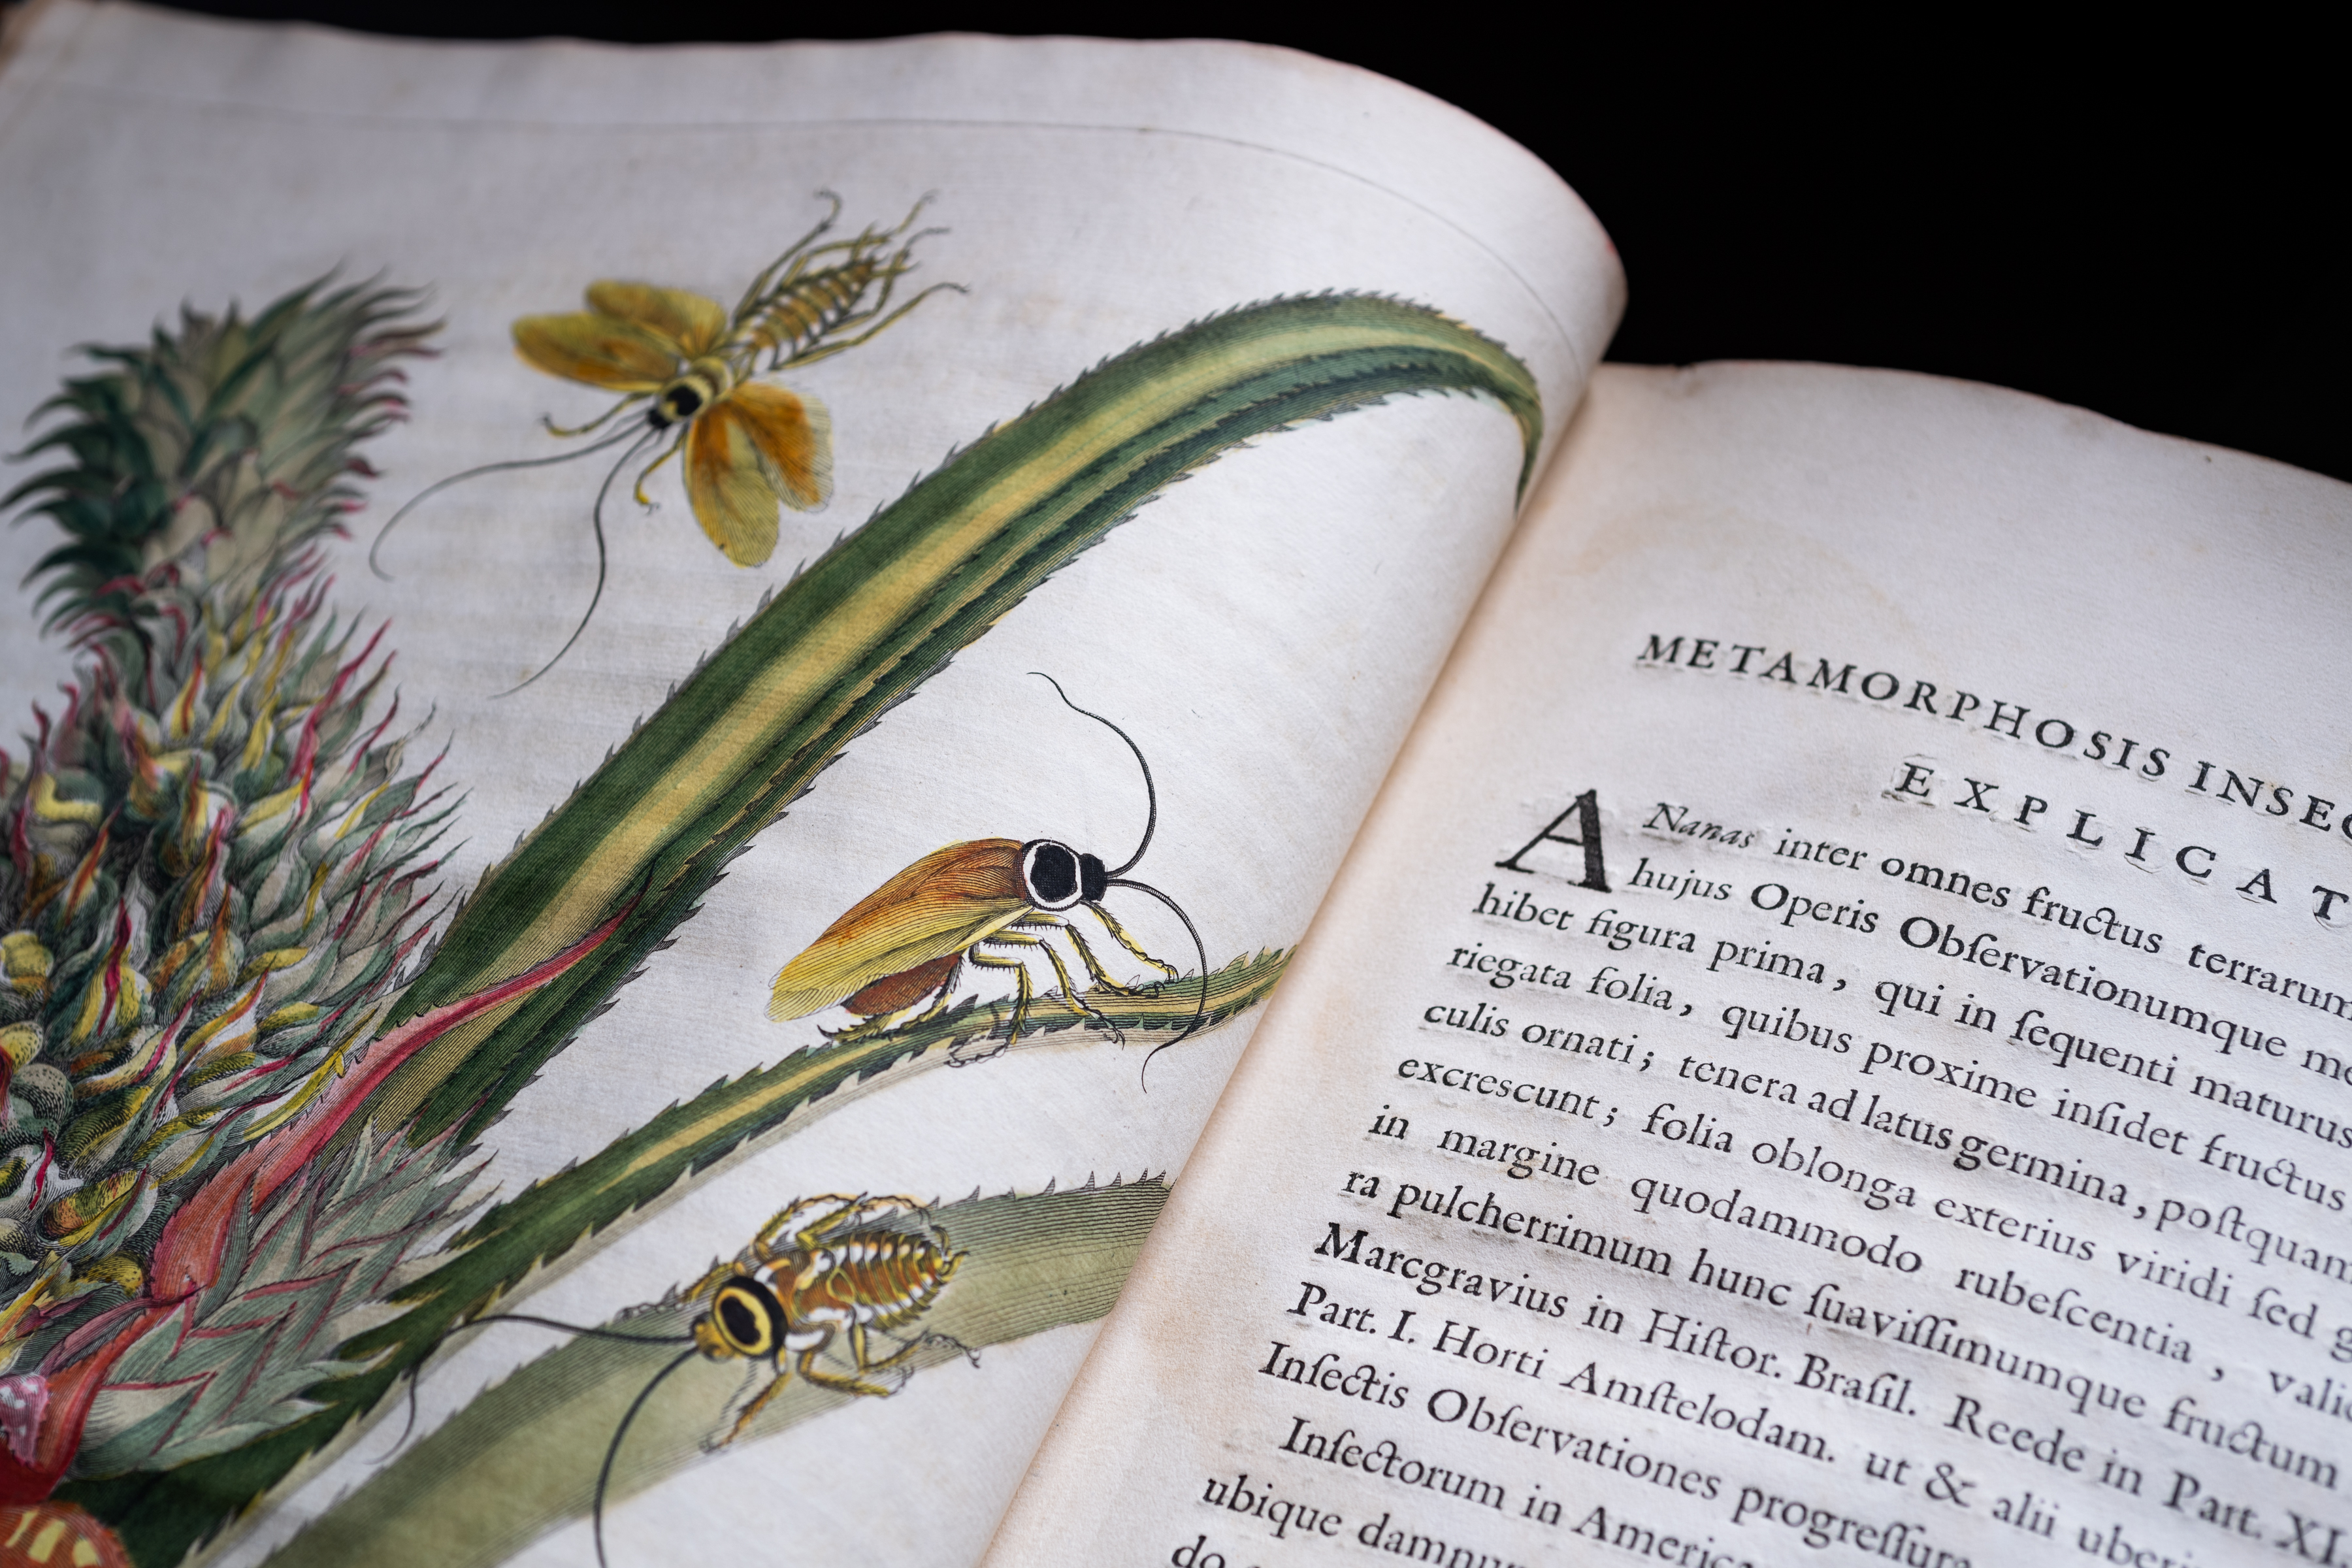 Detail of a printed book shows a full-page colored illustration of a plant with insects on it. On the opposite page, text in Latin is visible.